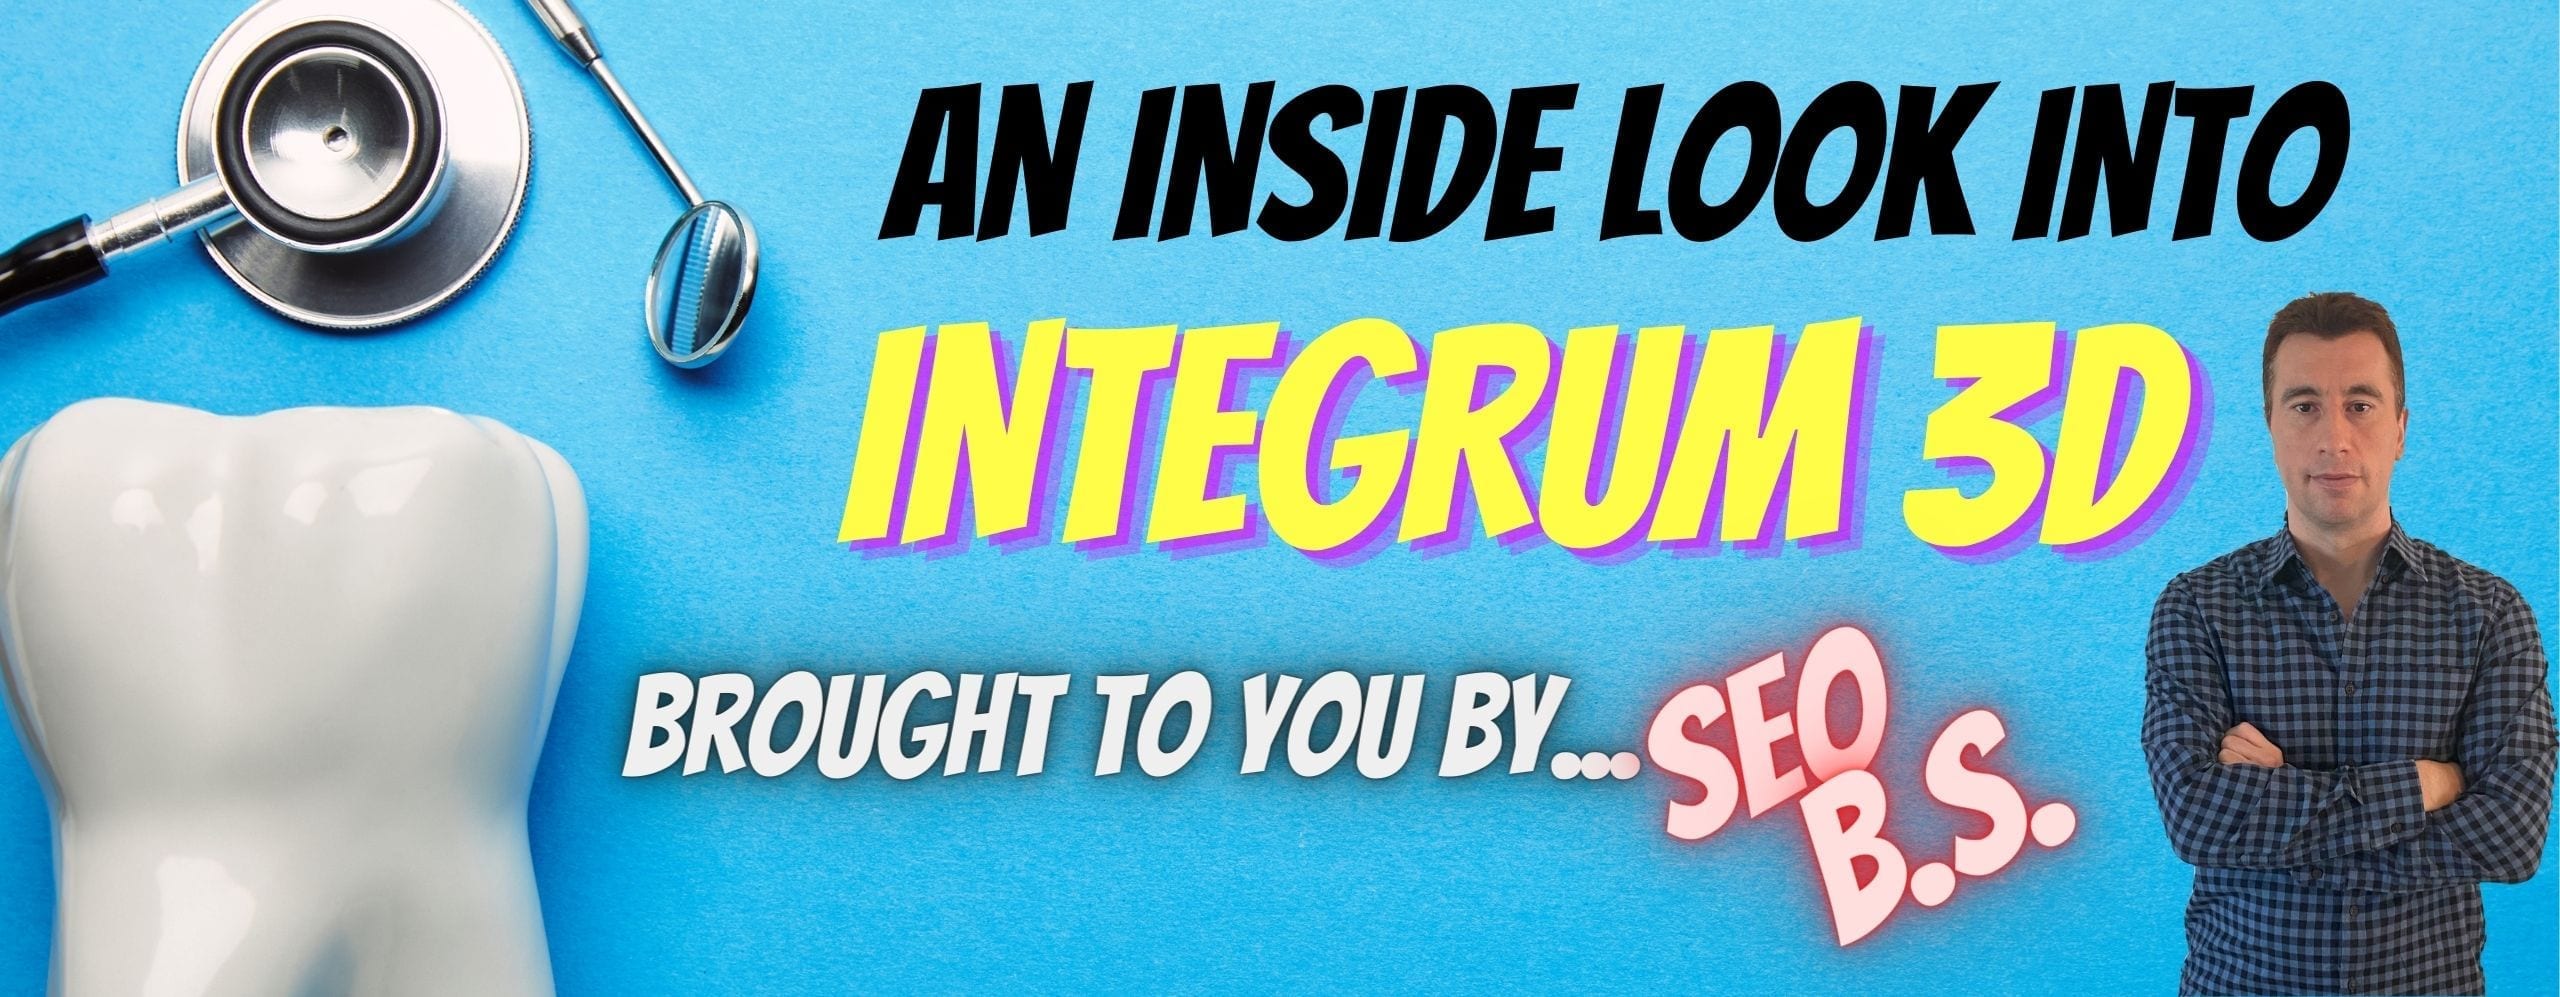 picture of integrum3d banner